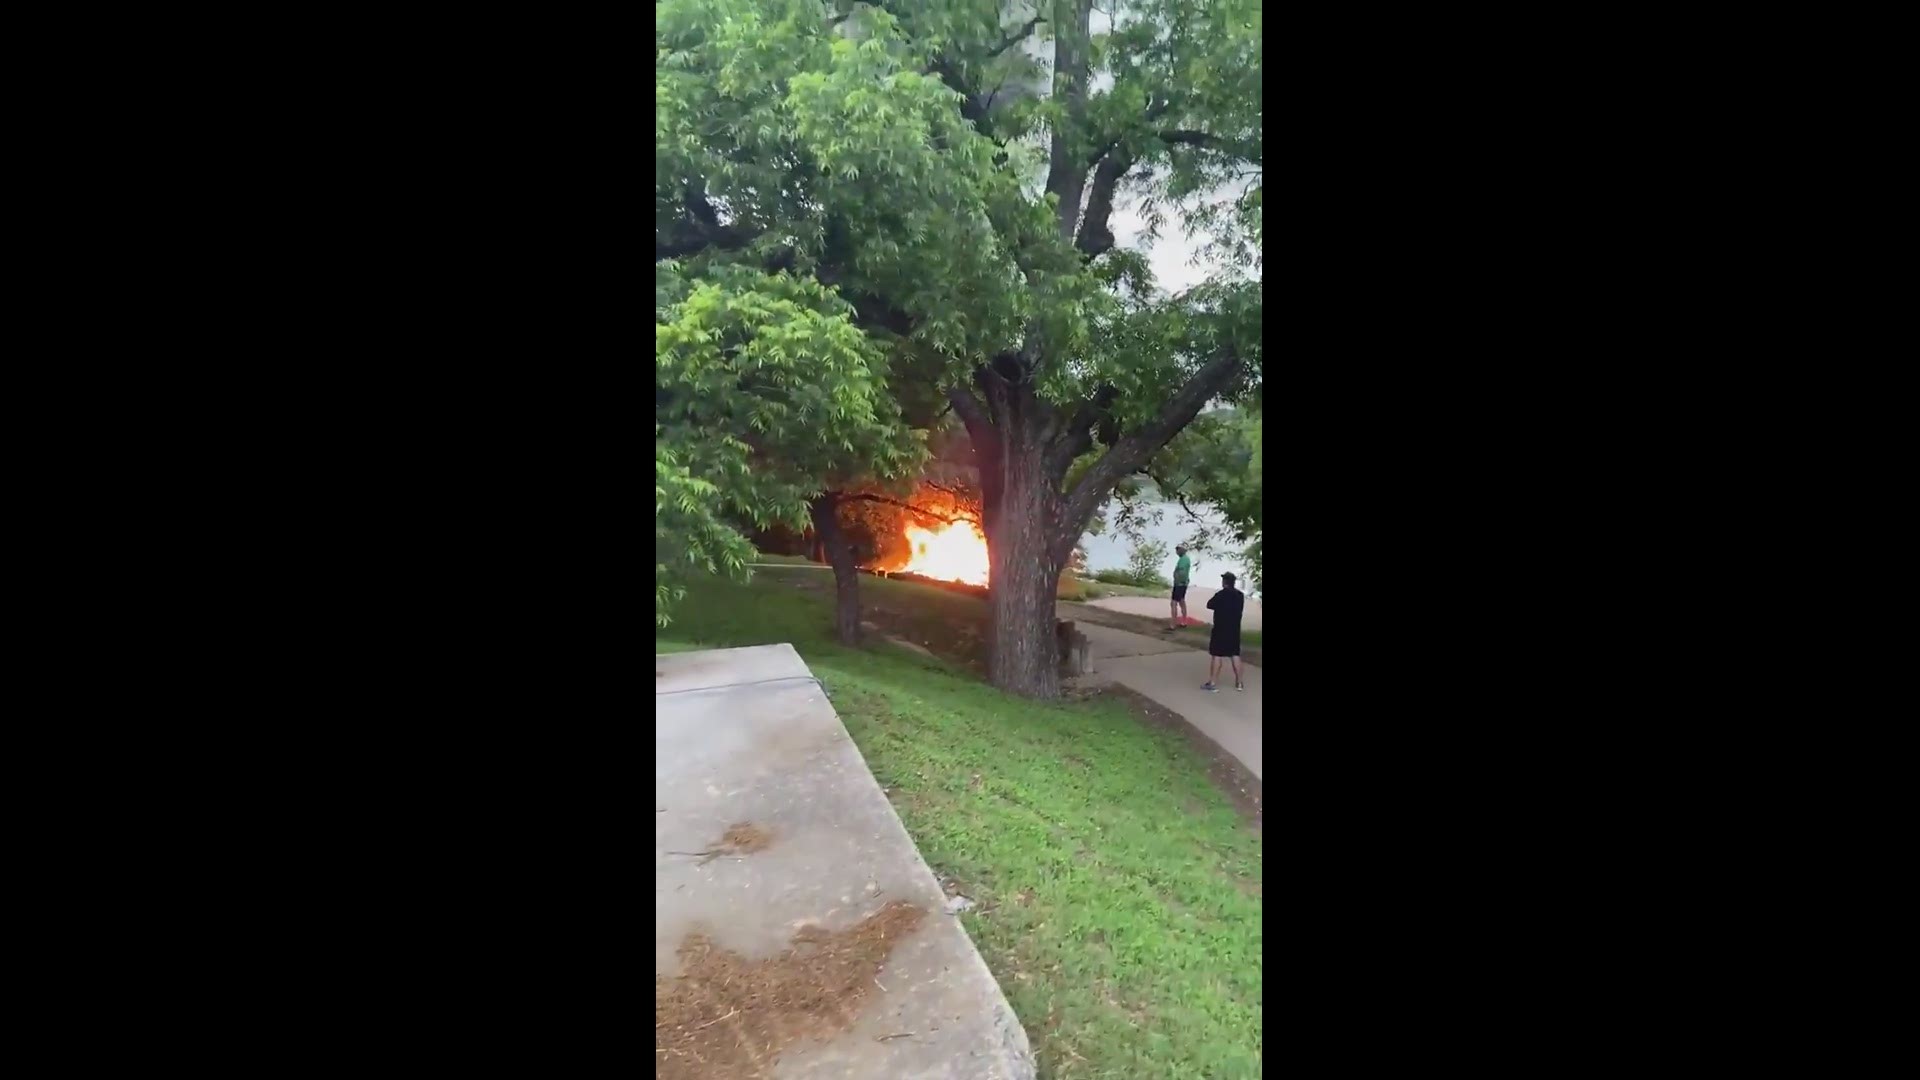 The Austin Fire Department on Friday, May 14 put out a campfire near Lady Bird Lake. Video: James Lafferty.